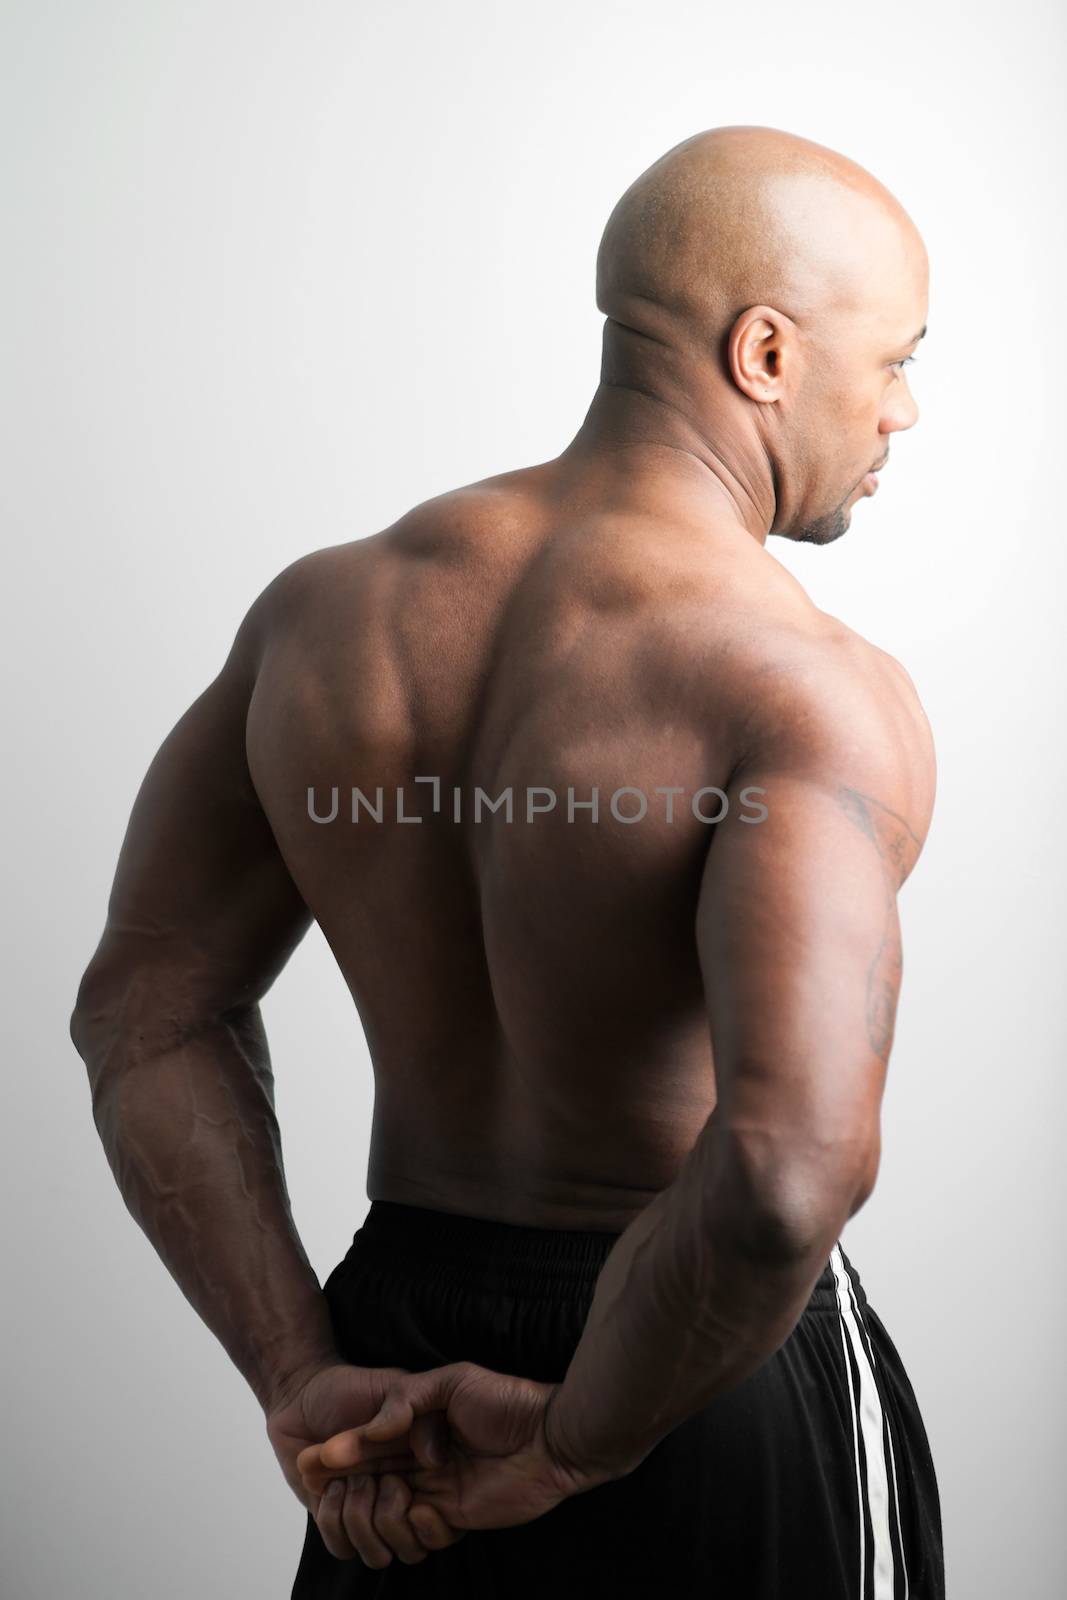 Toned and ripped body builder with a muscular back.